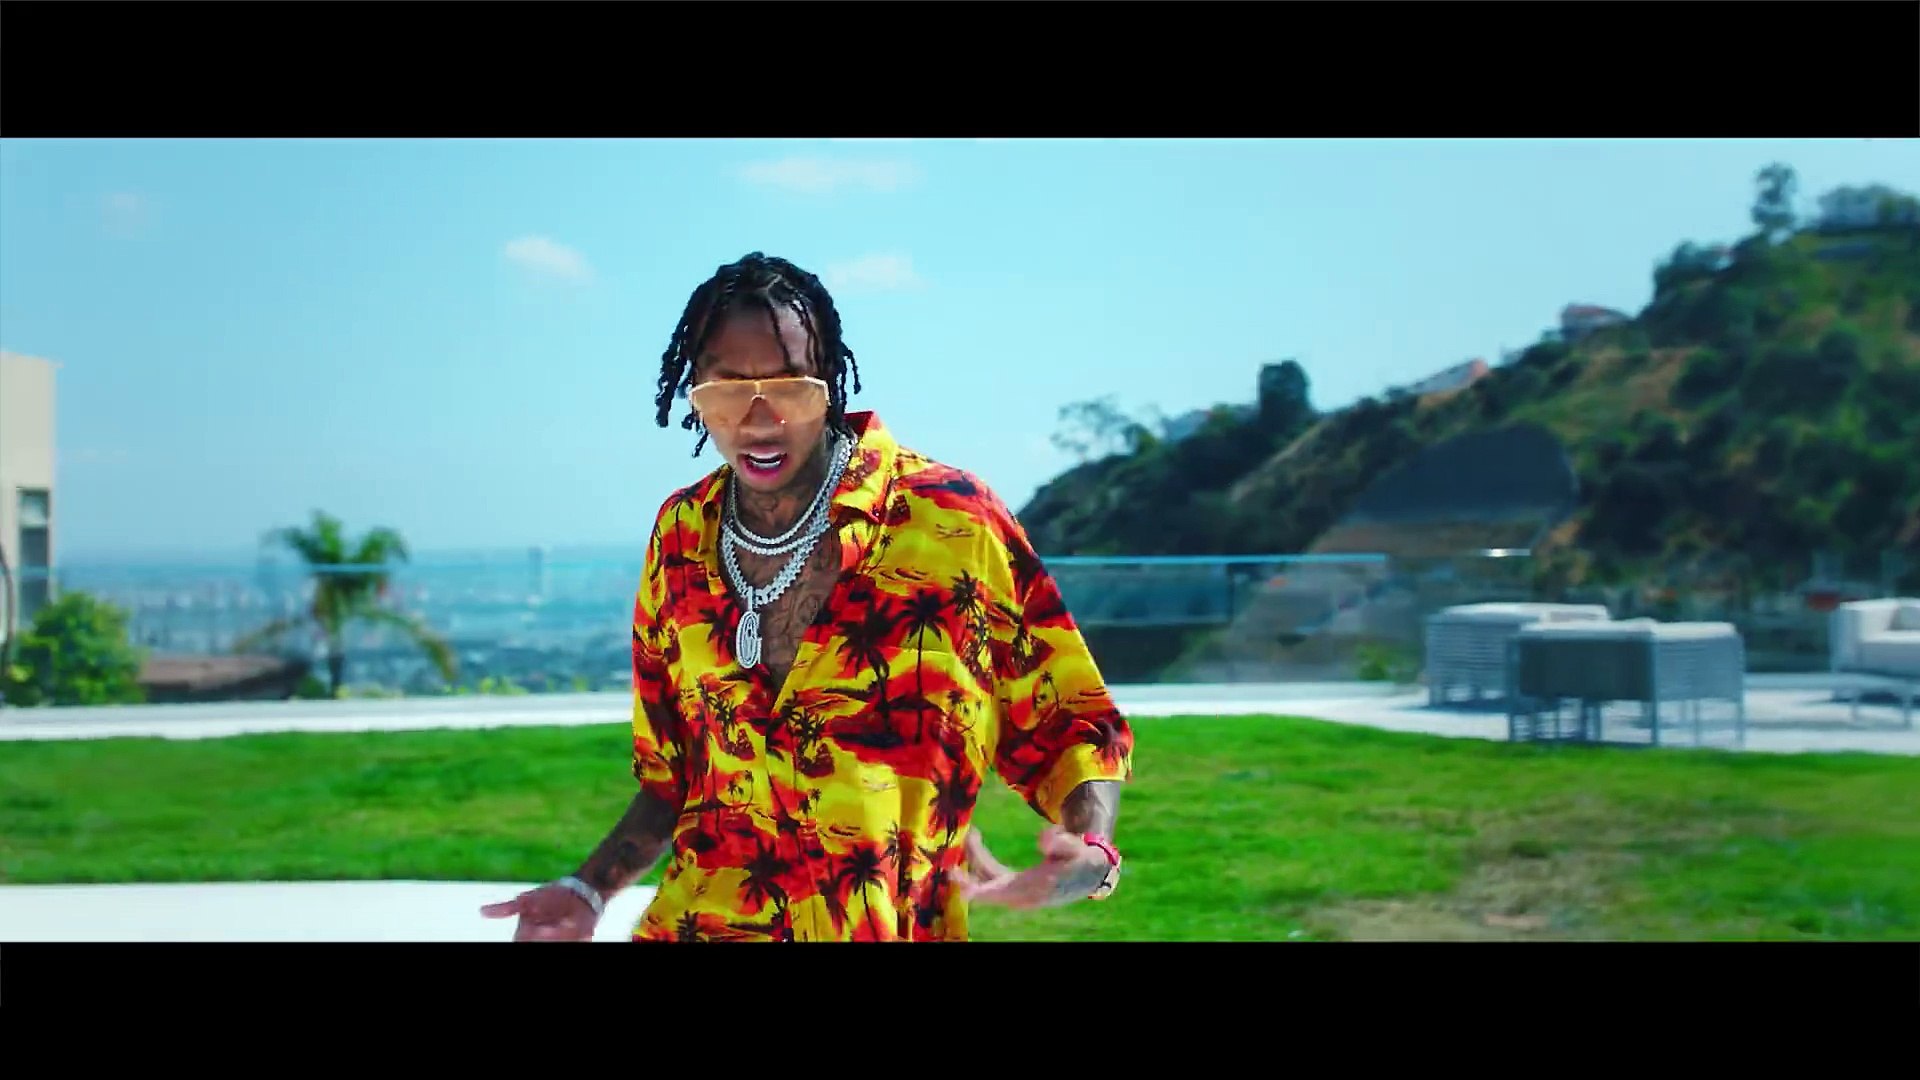 Tyga - Taste (Official Video) ft. Offset - video Dailymotion